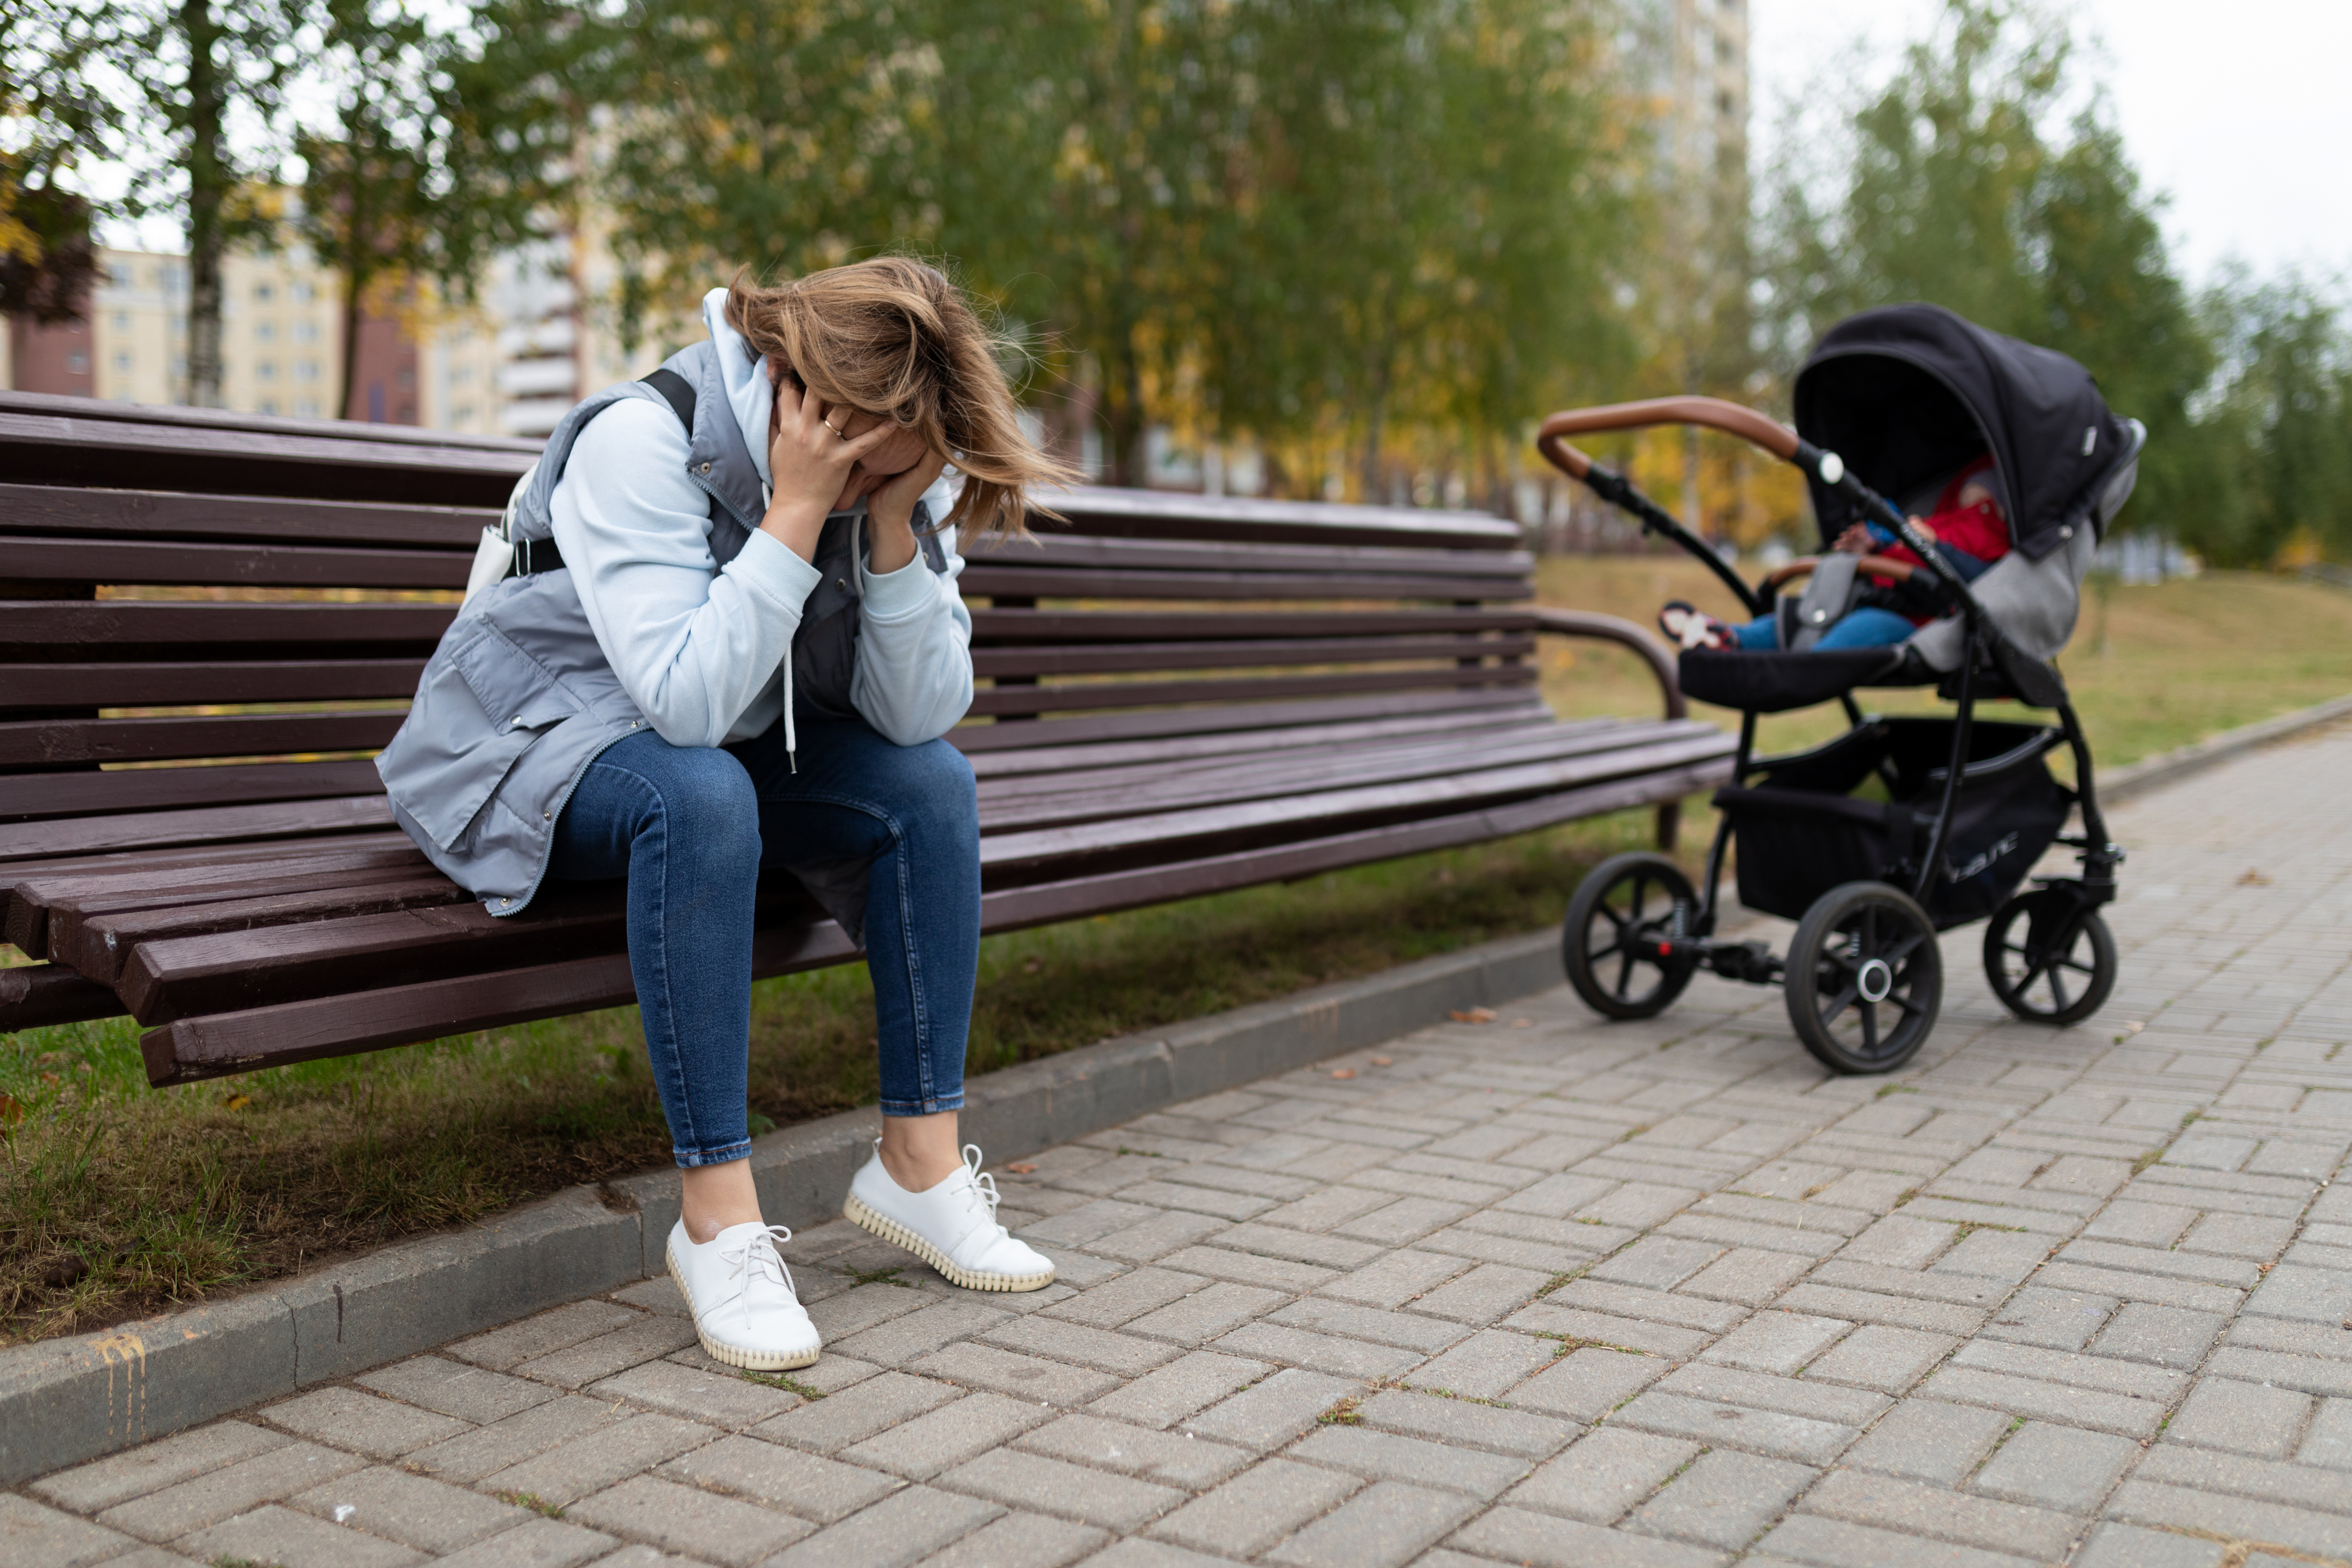 Zuranolone's rapid onset of action offers a potential breakthrough for postpartum depression.